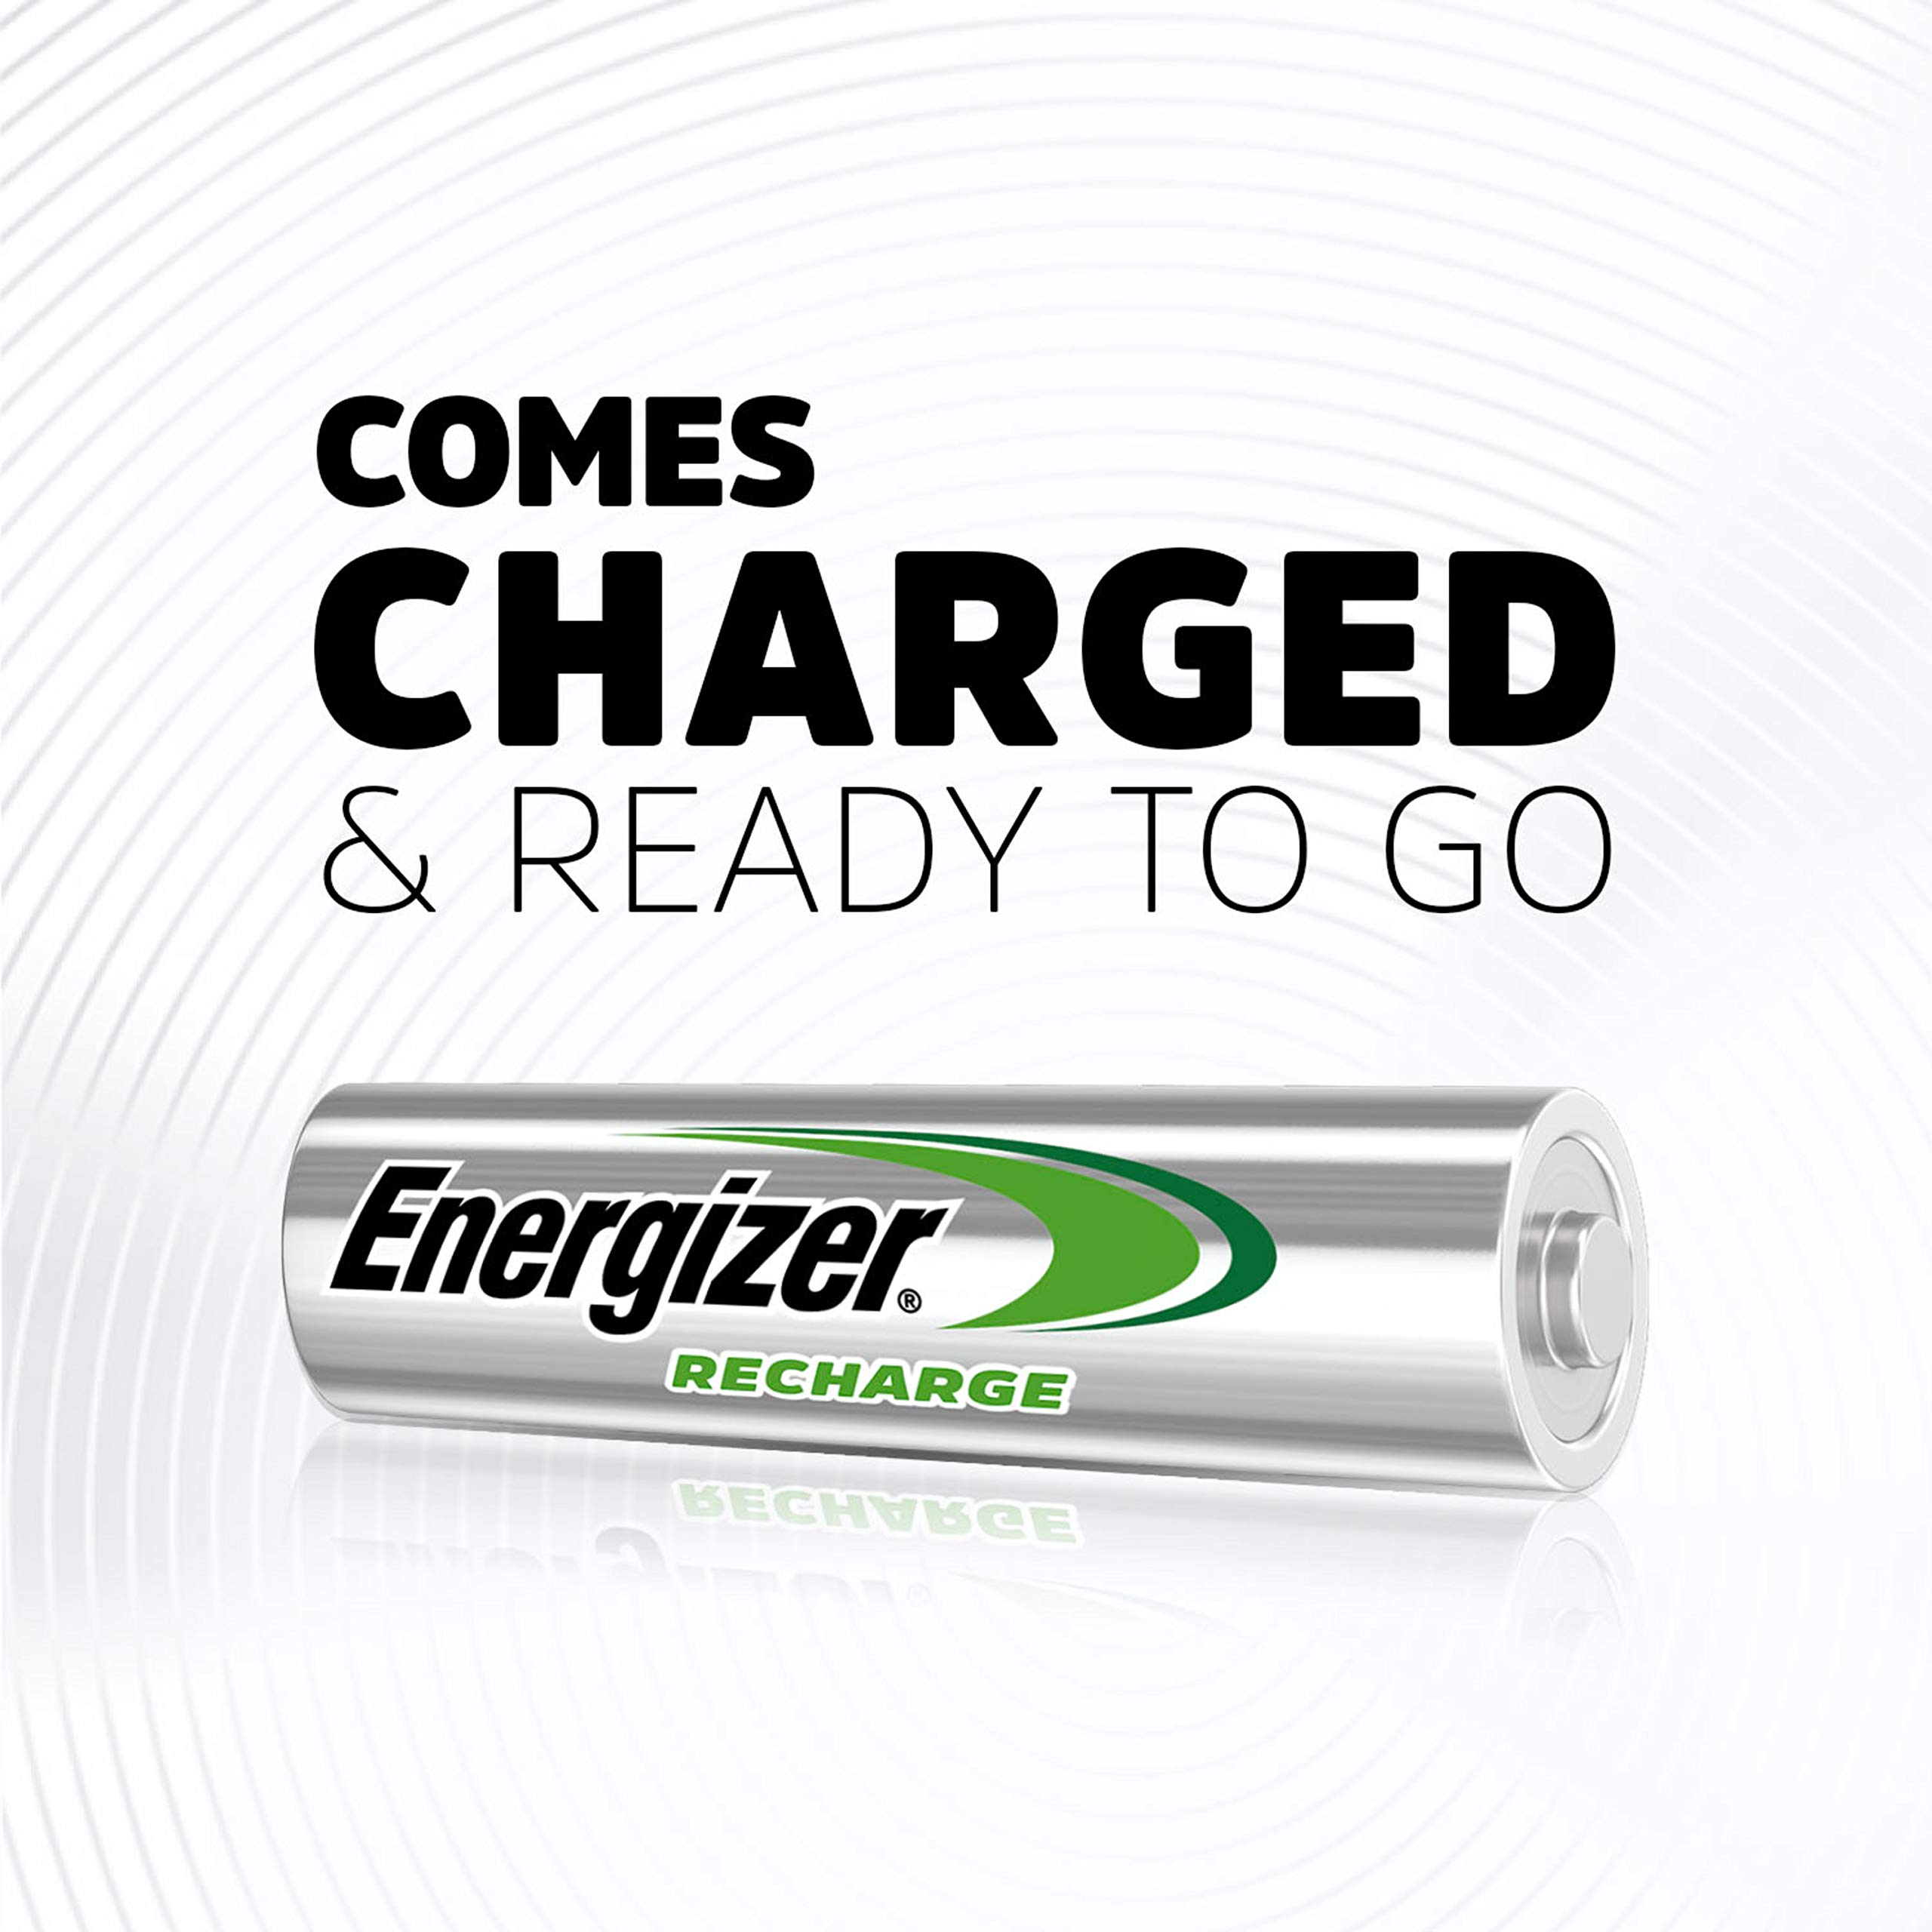 Energizer Rechargeable AA Batteries, Recharge Universal Double A Battery Pre-Charged, 16 Count